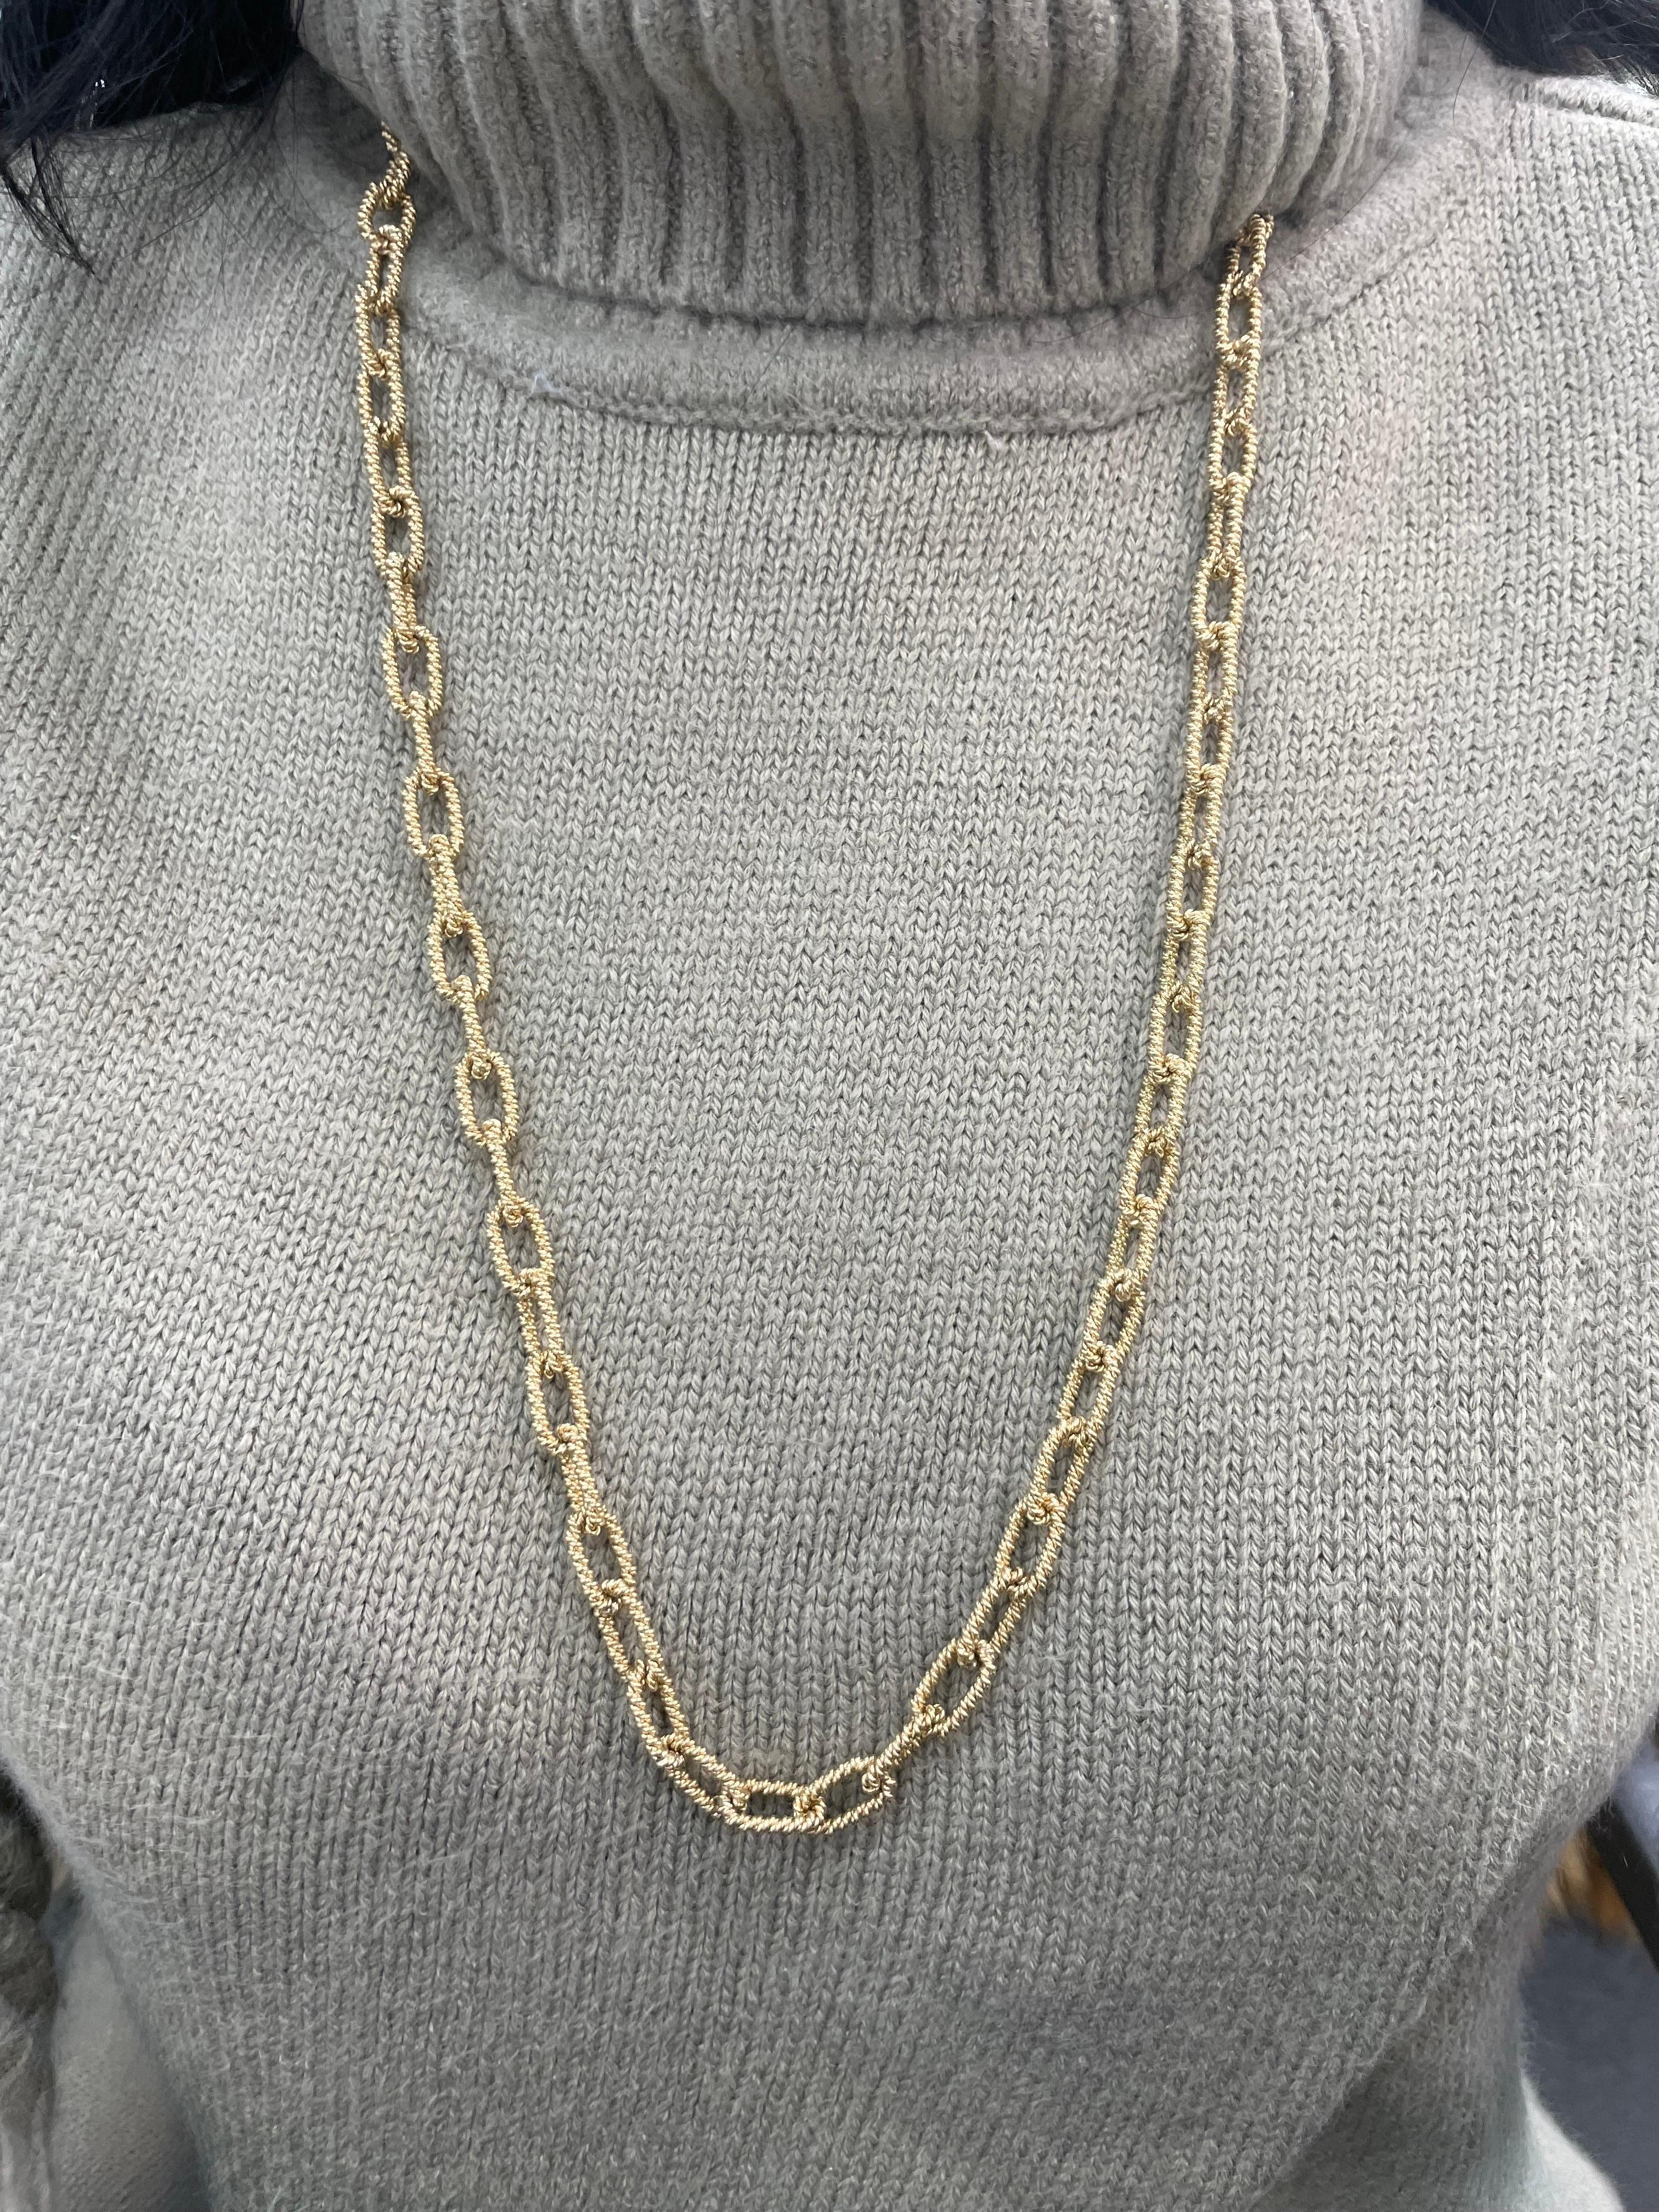 14 Karat Yellow Gold Heavy Rope Link Chain Necklace 84.5 Grams For Sale 3